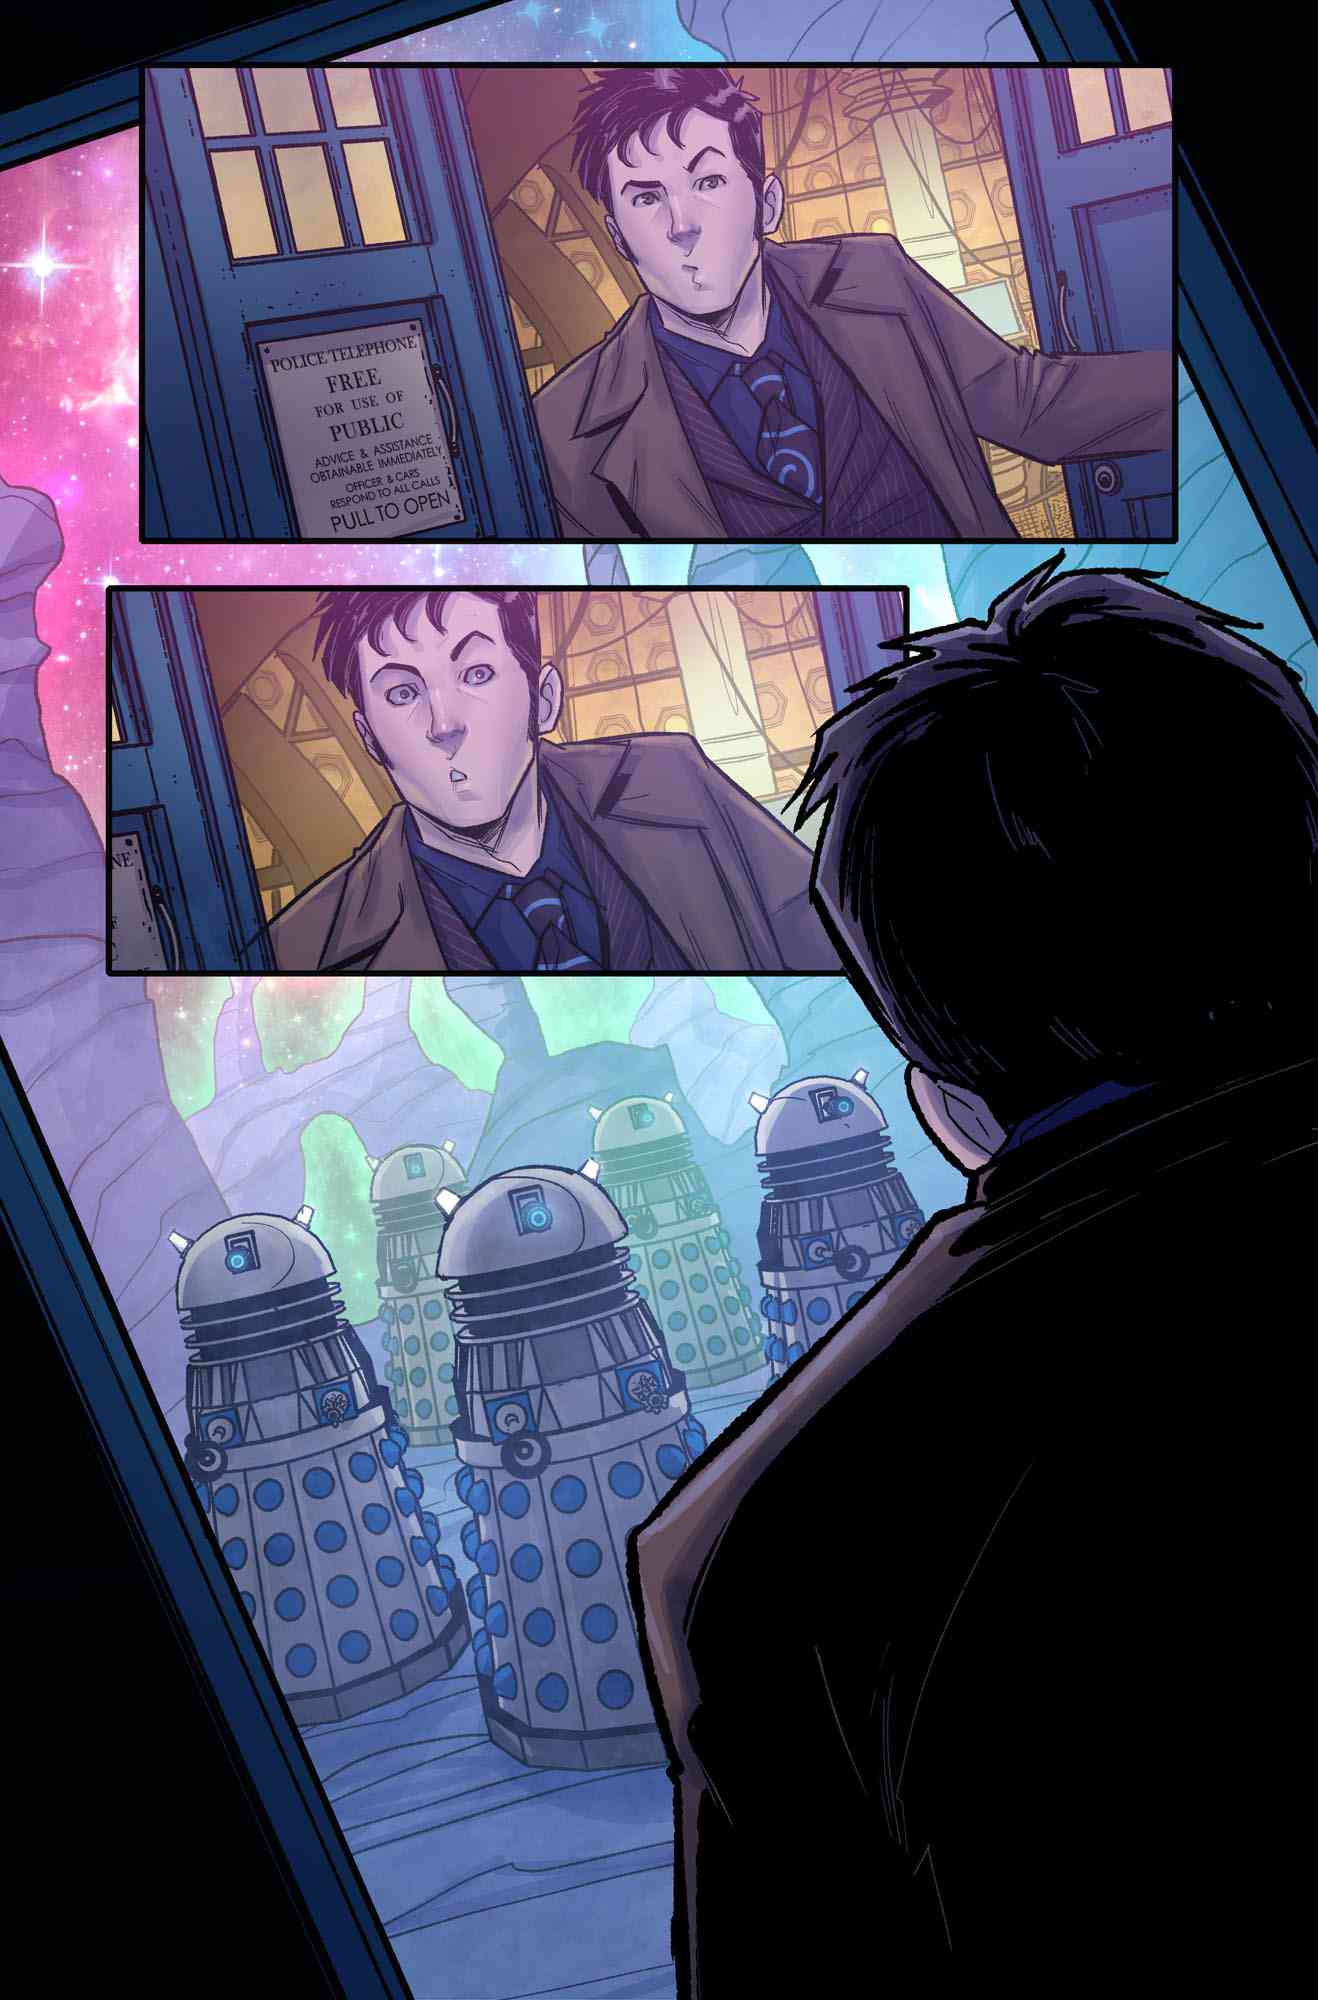 Doctor Who: Time Lord Victorious #1